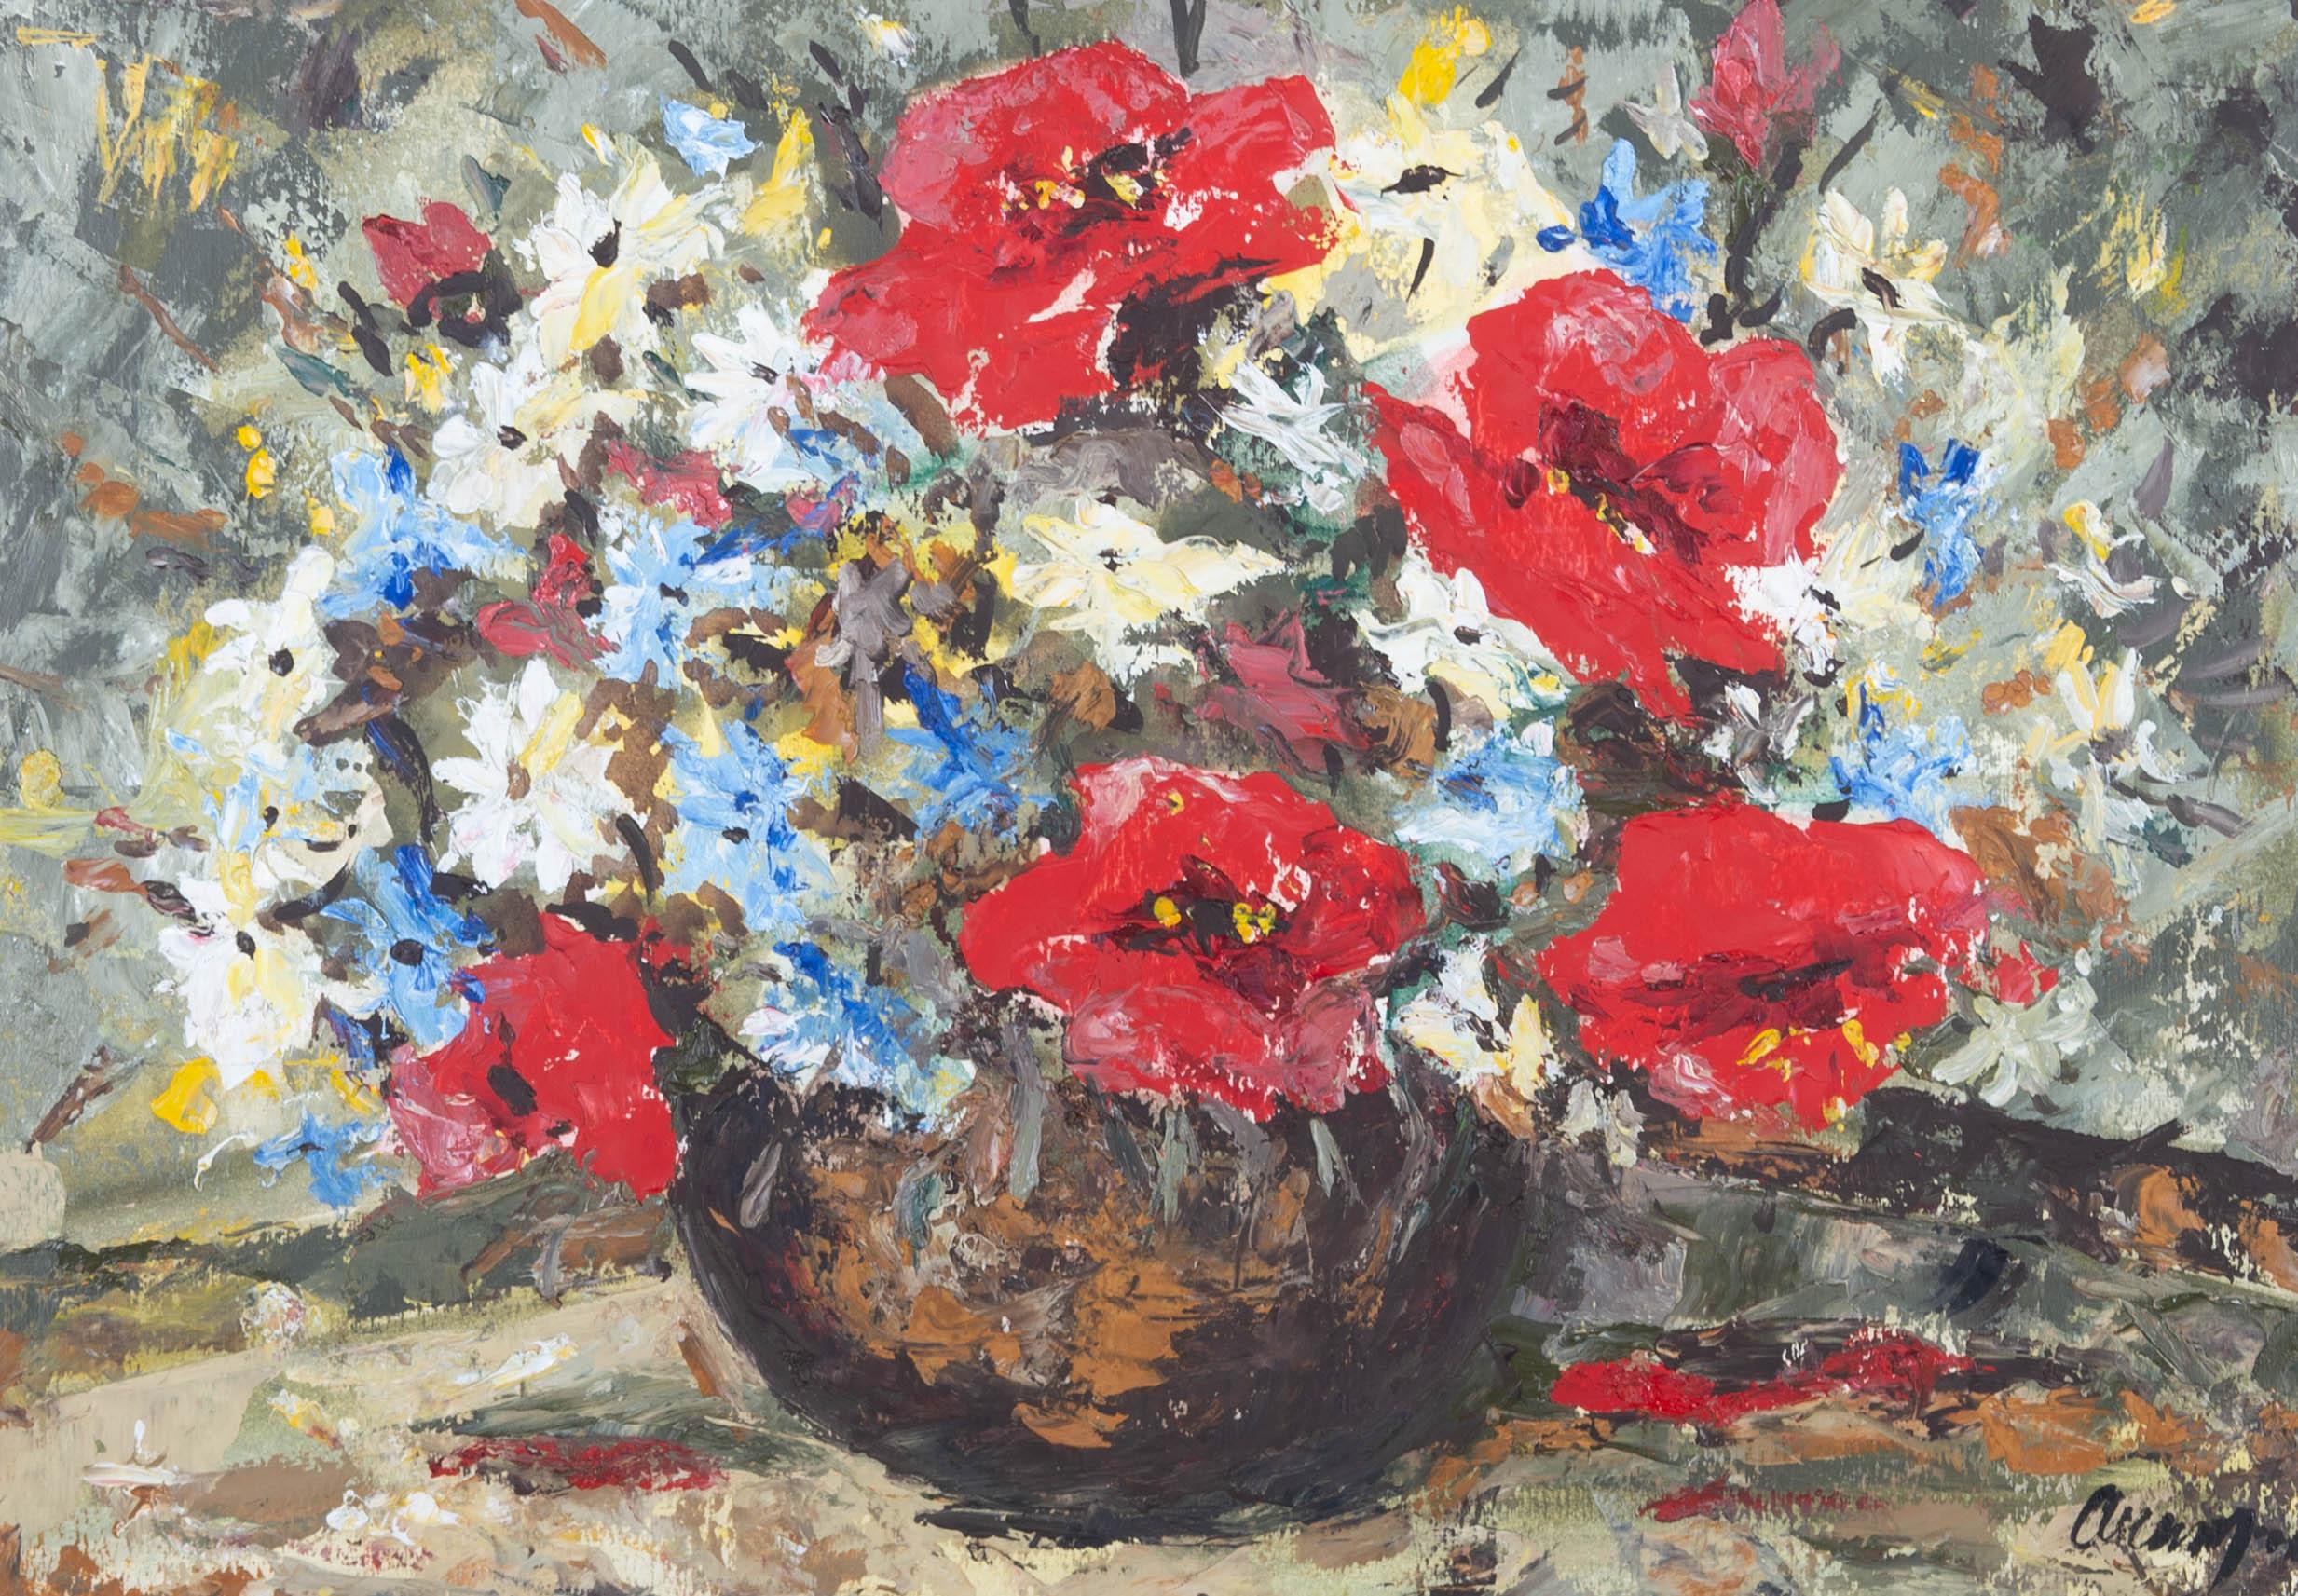 Contemporary Oil - Still Life with Red, Yellow & Blue Flowers - Gray Still-Life Painting by Unknown